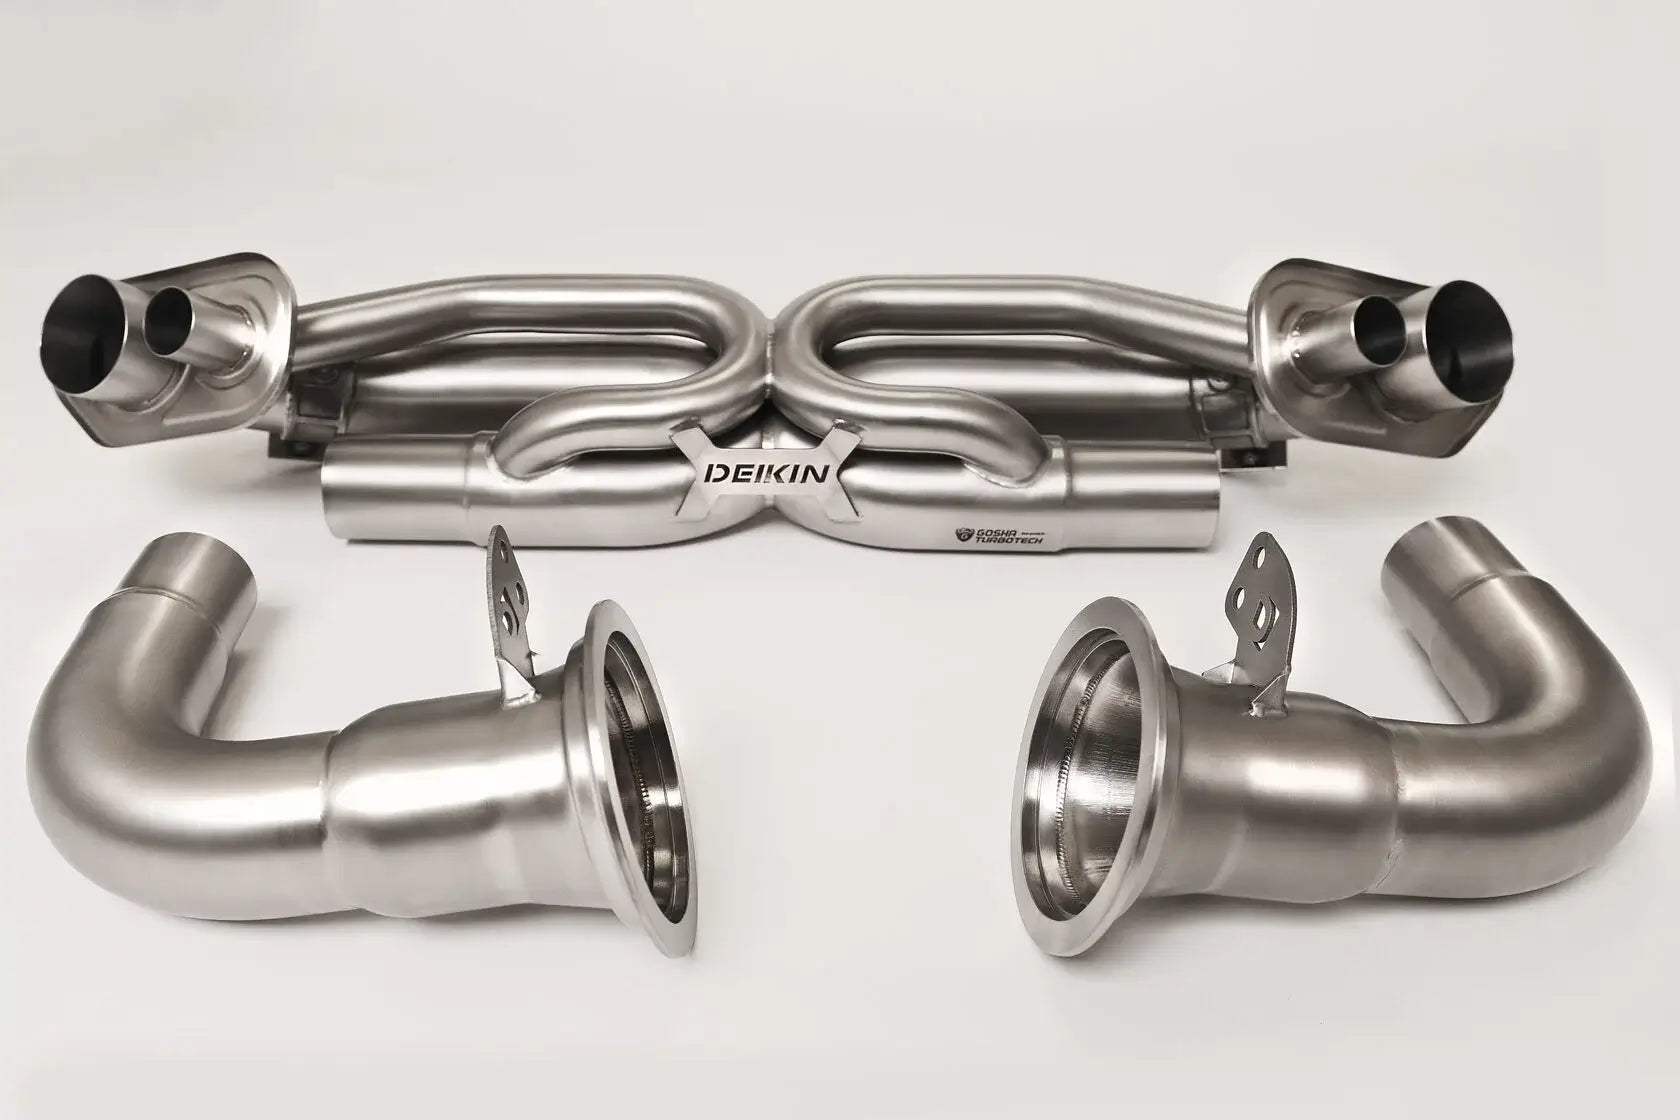 DEIKIN 10-PO.911.T/TS.992.R-ES-DP-Ti-00 Exhaust system "Race" Titan for Porsche 911 Turbo/Turbo S (992) complete with downpipes without HeatShield Photo-1 